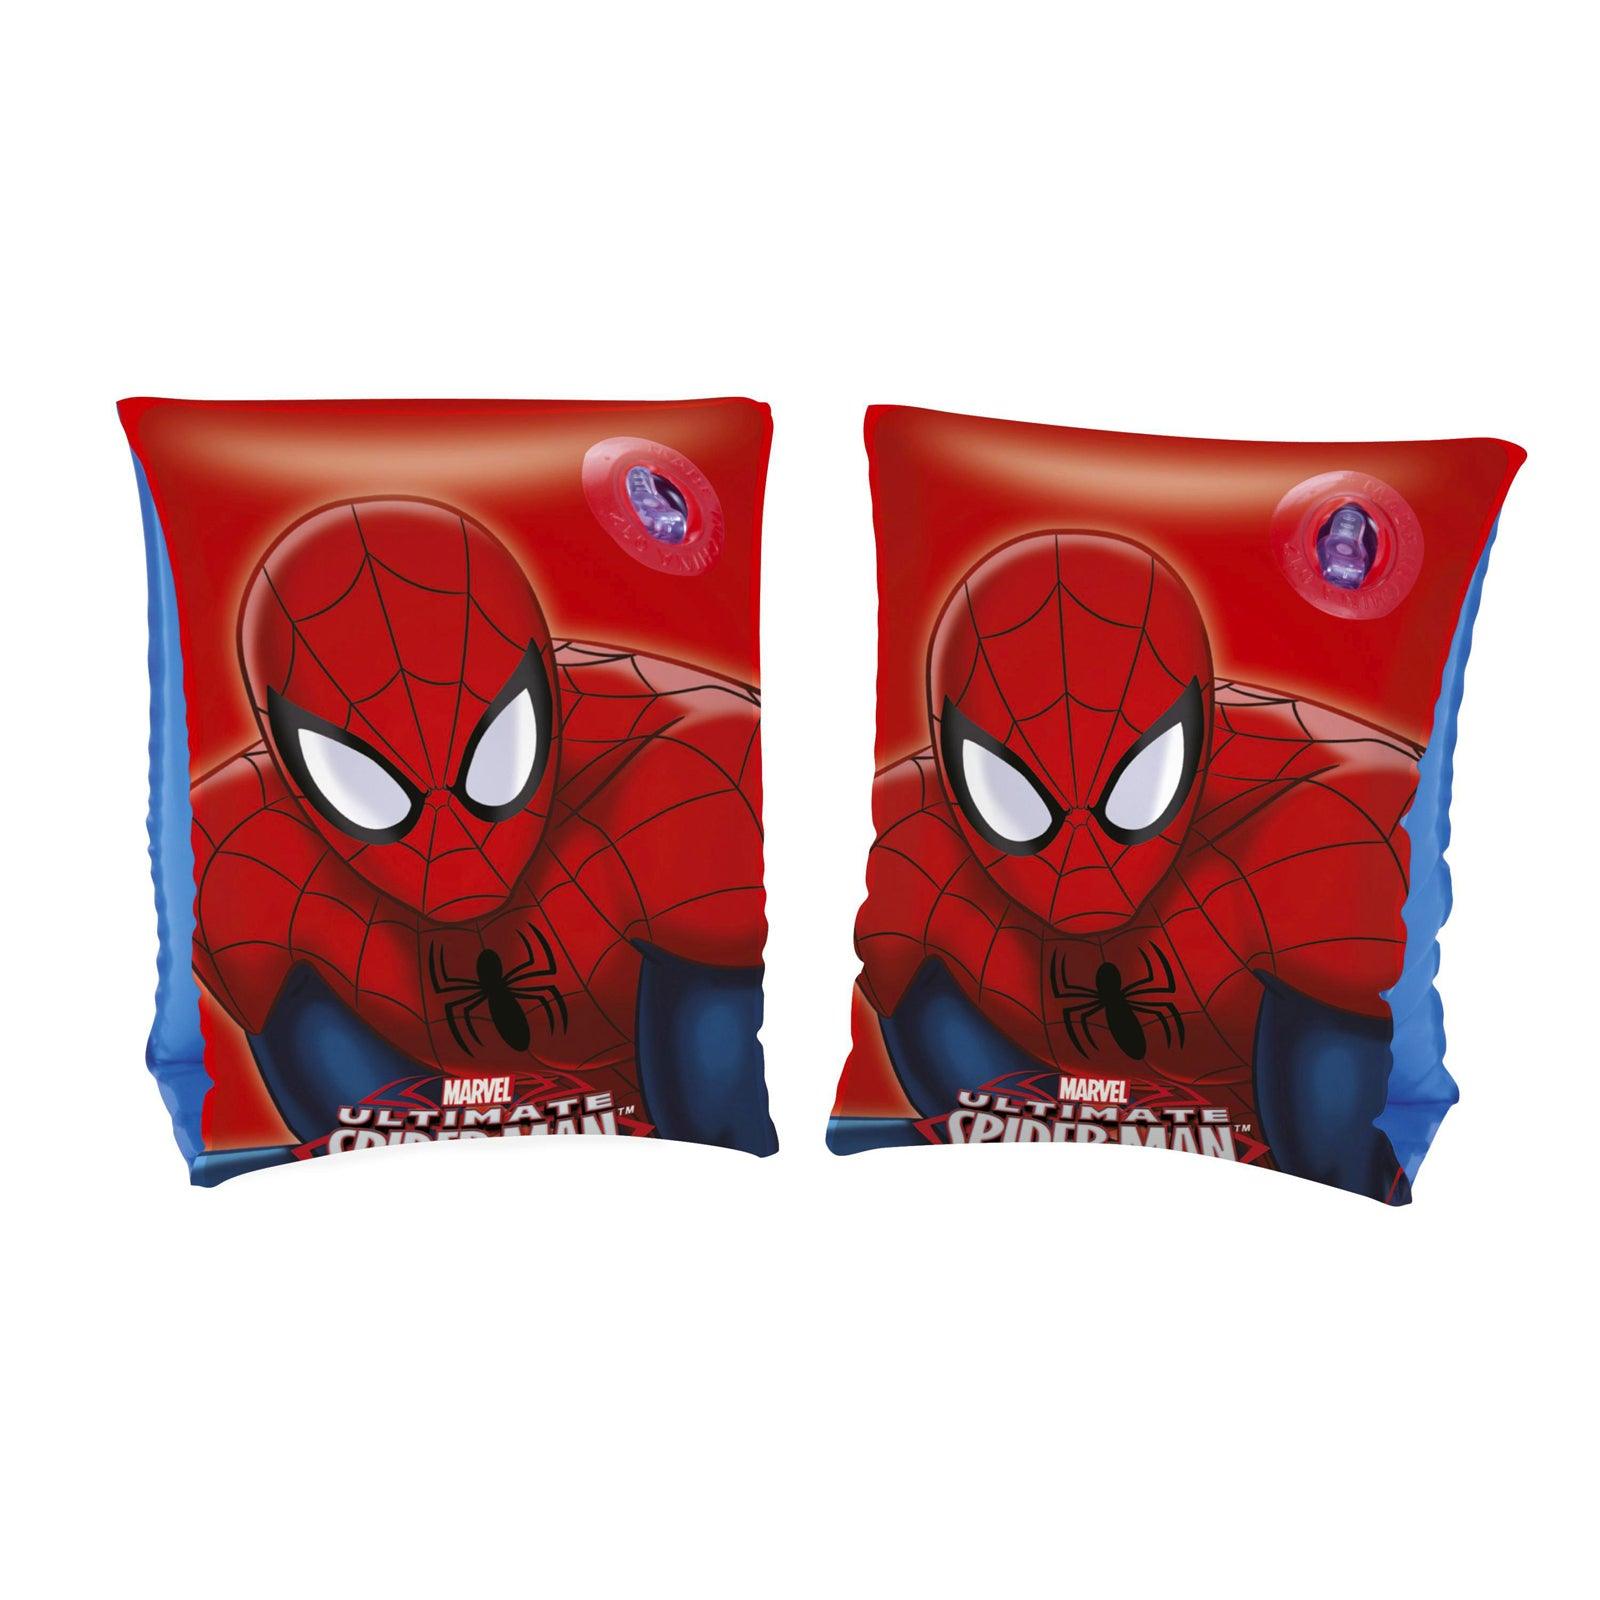 MARVEL ULTIMATE SPIDER-MANâ„¢ Swim Bands for Kids 9" x 6" 3-6 Years - Ourkids - Bestway